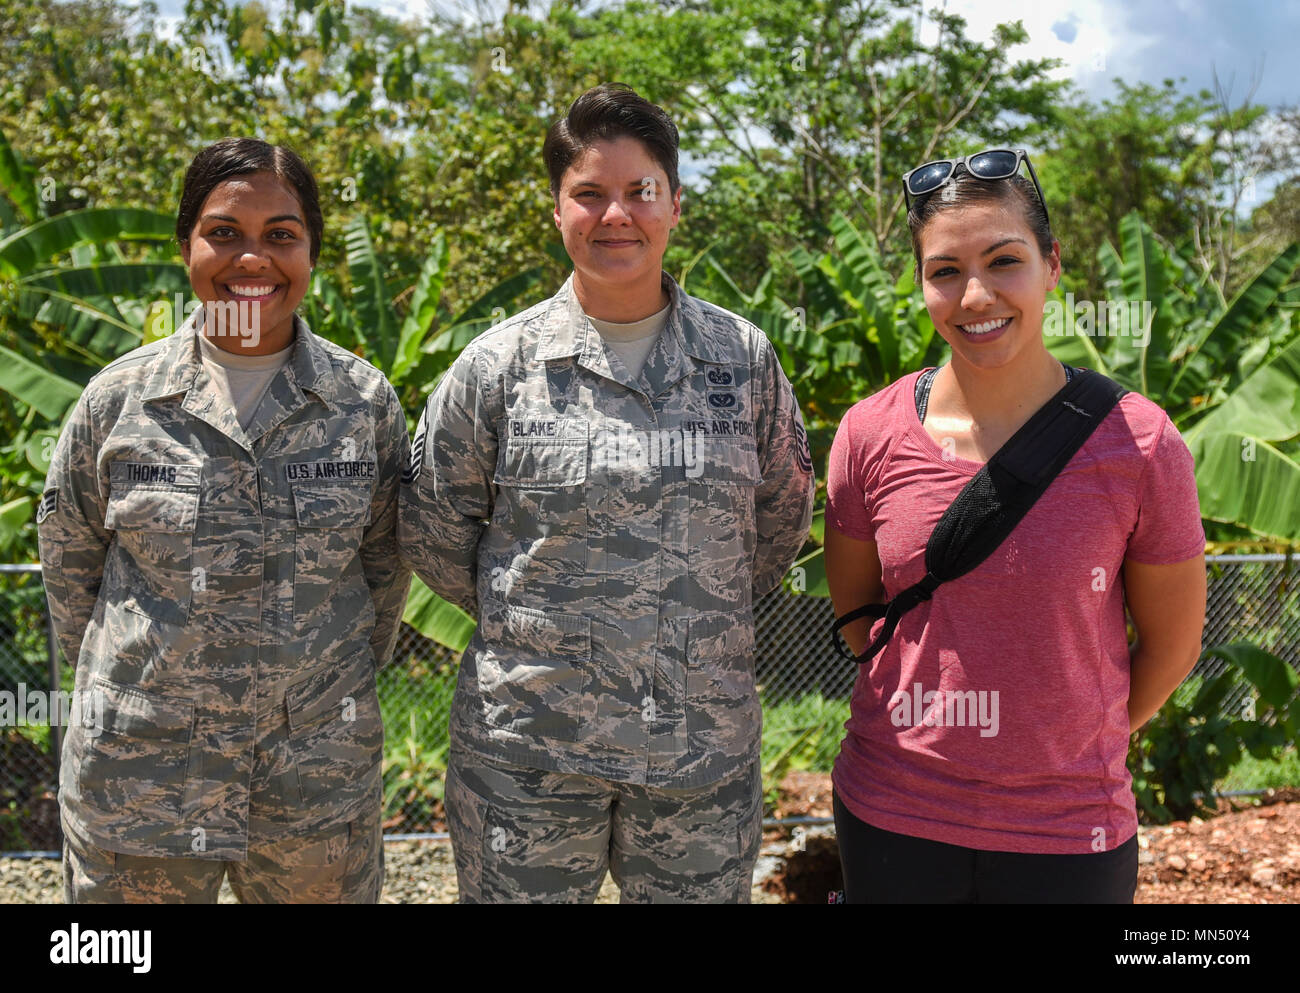 From left to right: U.S. Air Force Senior Airman Ariel Thomas, 346th Air Expeditionary Group medical technician, Master Sgt. Reina Blake, 346 AEG Office of the Legal Advisor superintendent, and Special Agent Alexandra Garced, Air Force Office of Special Investigations agent, stand for a group photo May 8, 2018, in Meteti, Panama. Blake, Thomas and Garced are credited with saving the life of a local Panamanian woman after she jumped from a bridge. (U.S. Air Force photo by Senior Airman Dustin Mullen/Released) Stock Photo